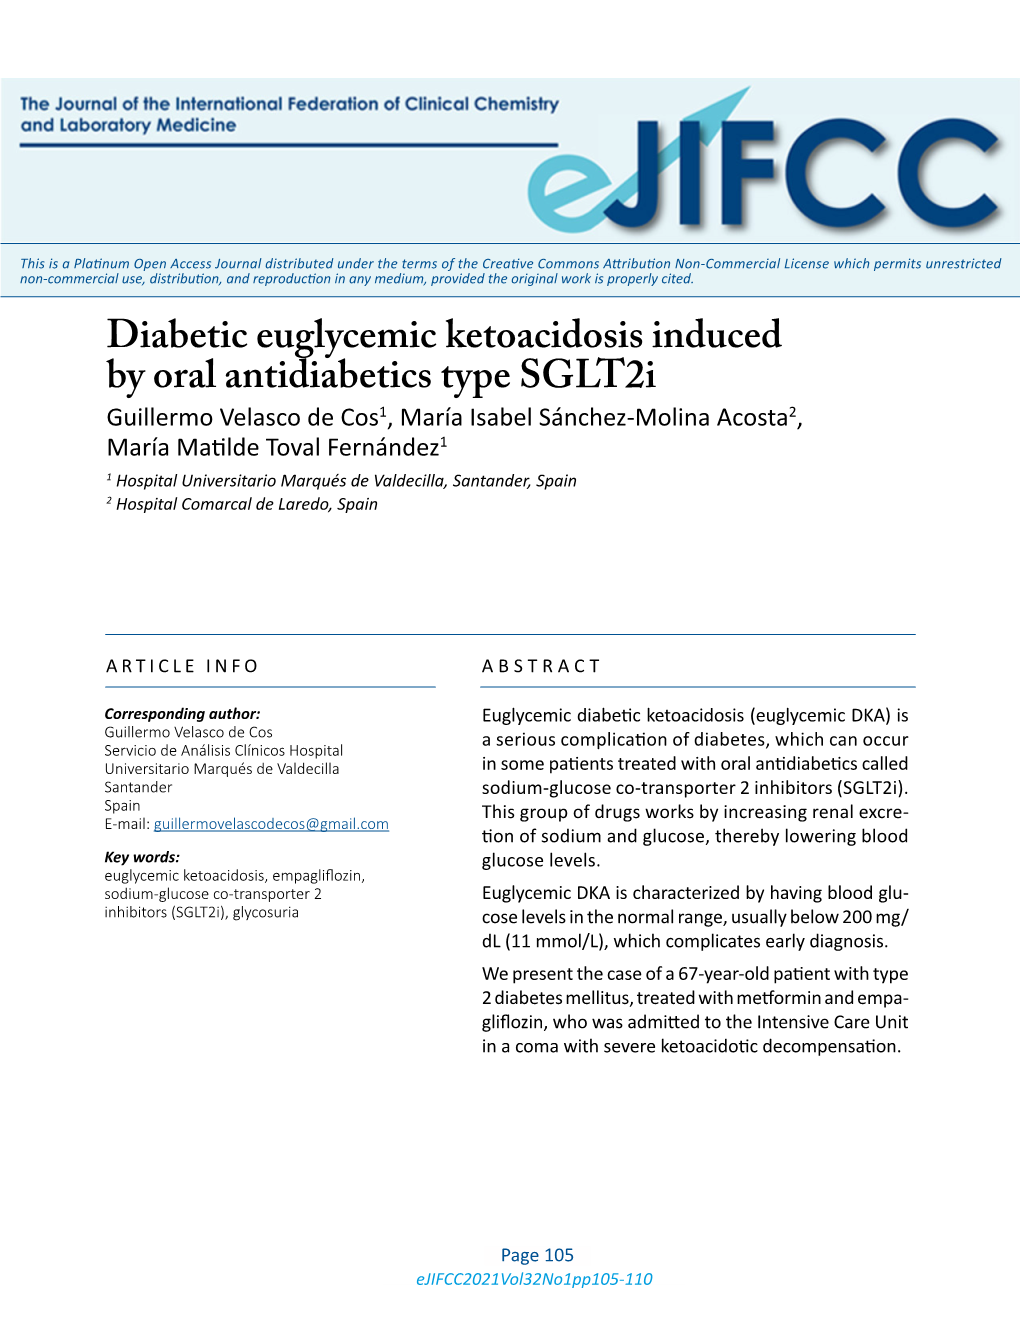 Diabetic Euglycemic Ketoacidosis Induced by Oral Antidiabetics Type